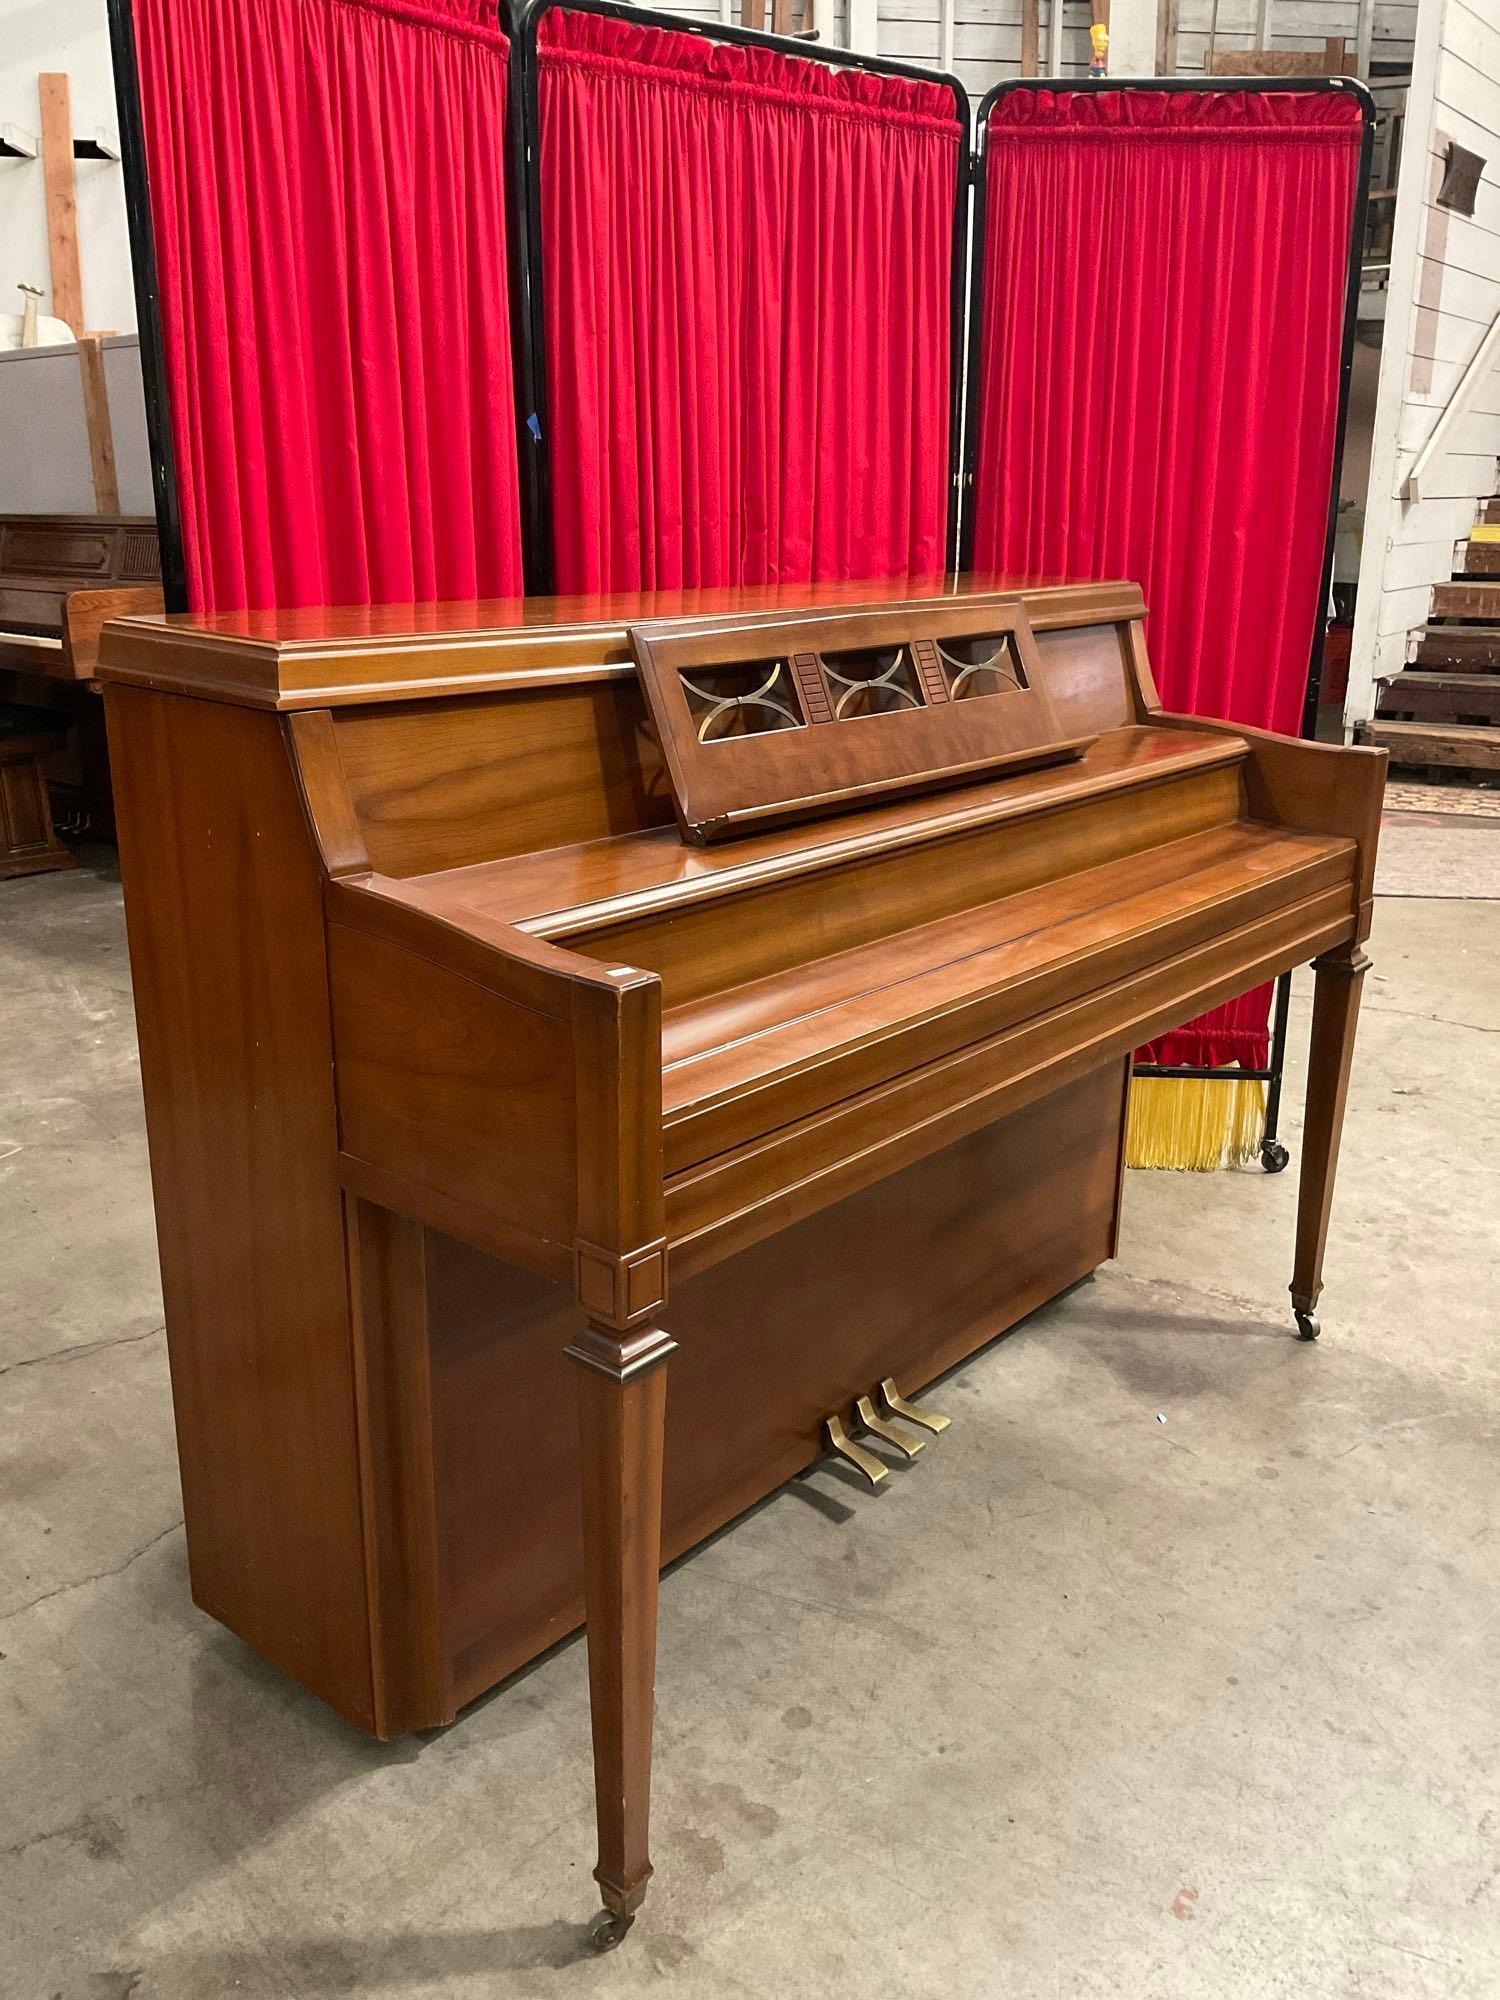 Vintage Kimball Life Crowned Piano No. 641924. Tested, Works. Measures 56.5" x 42" See pics.